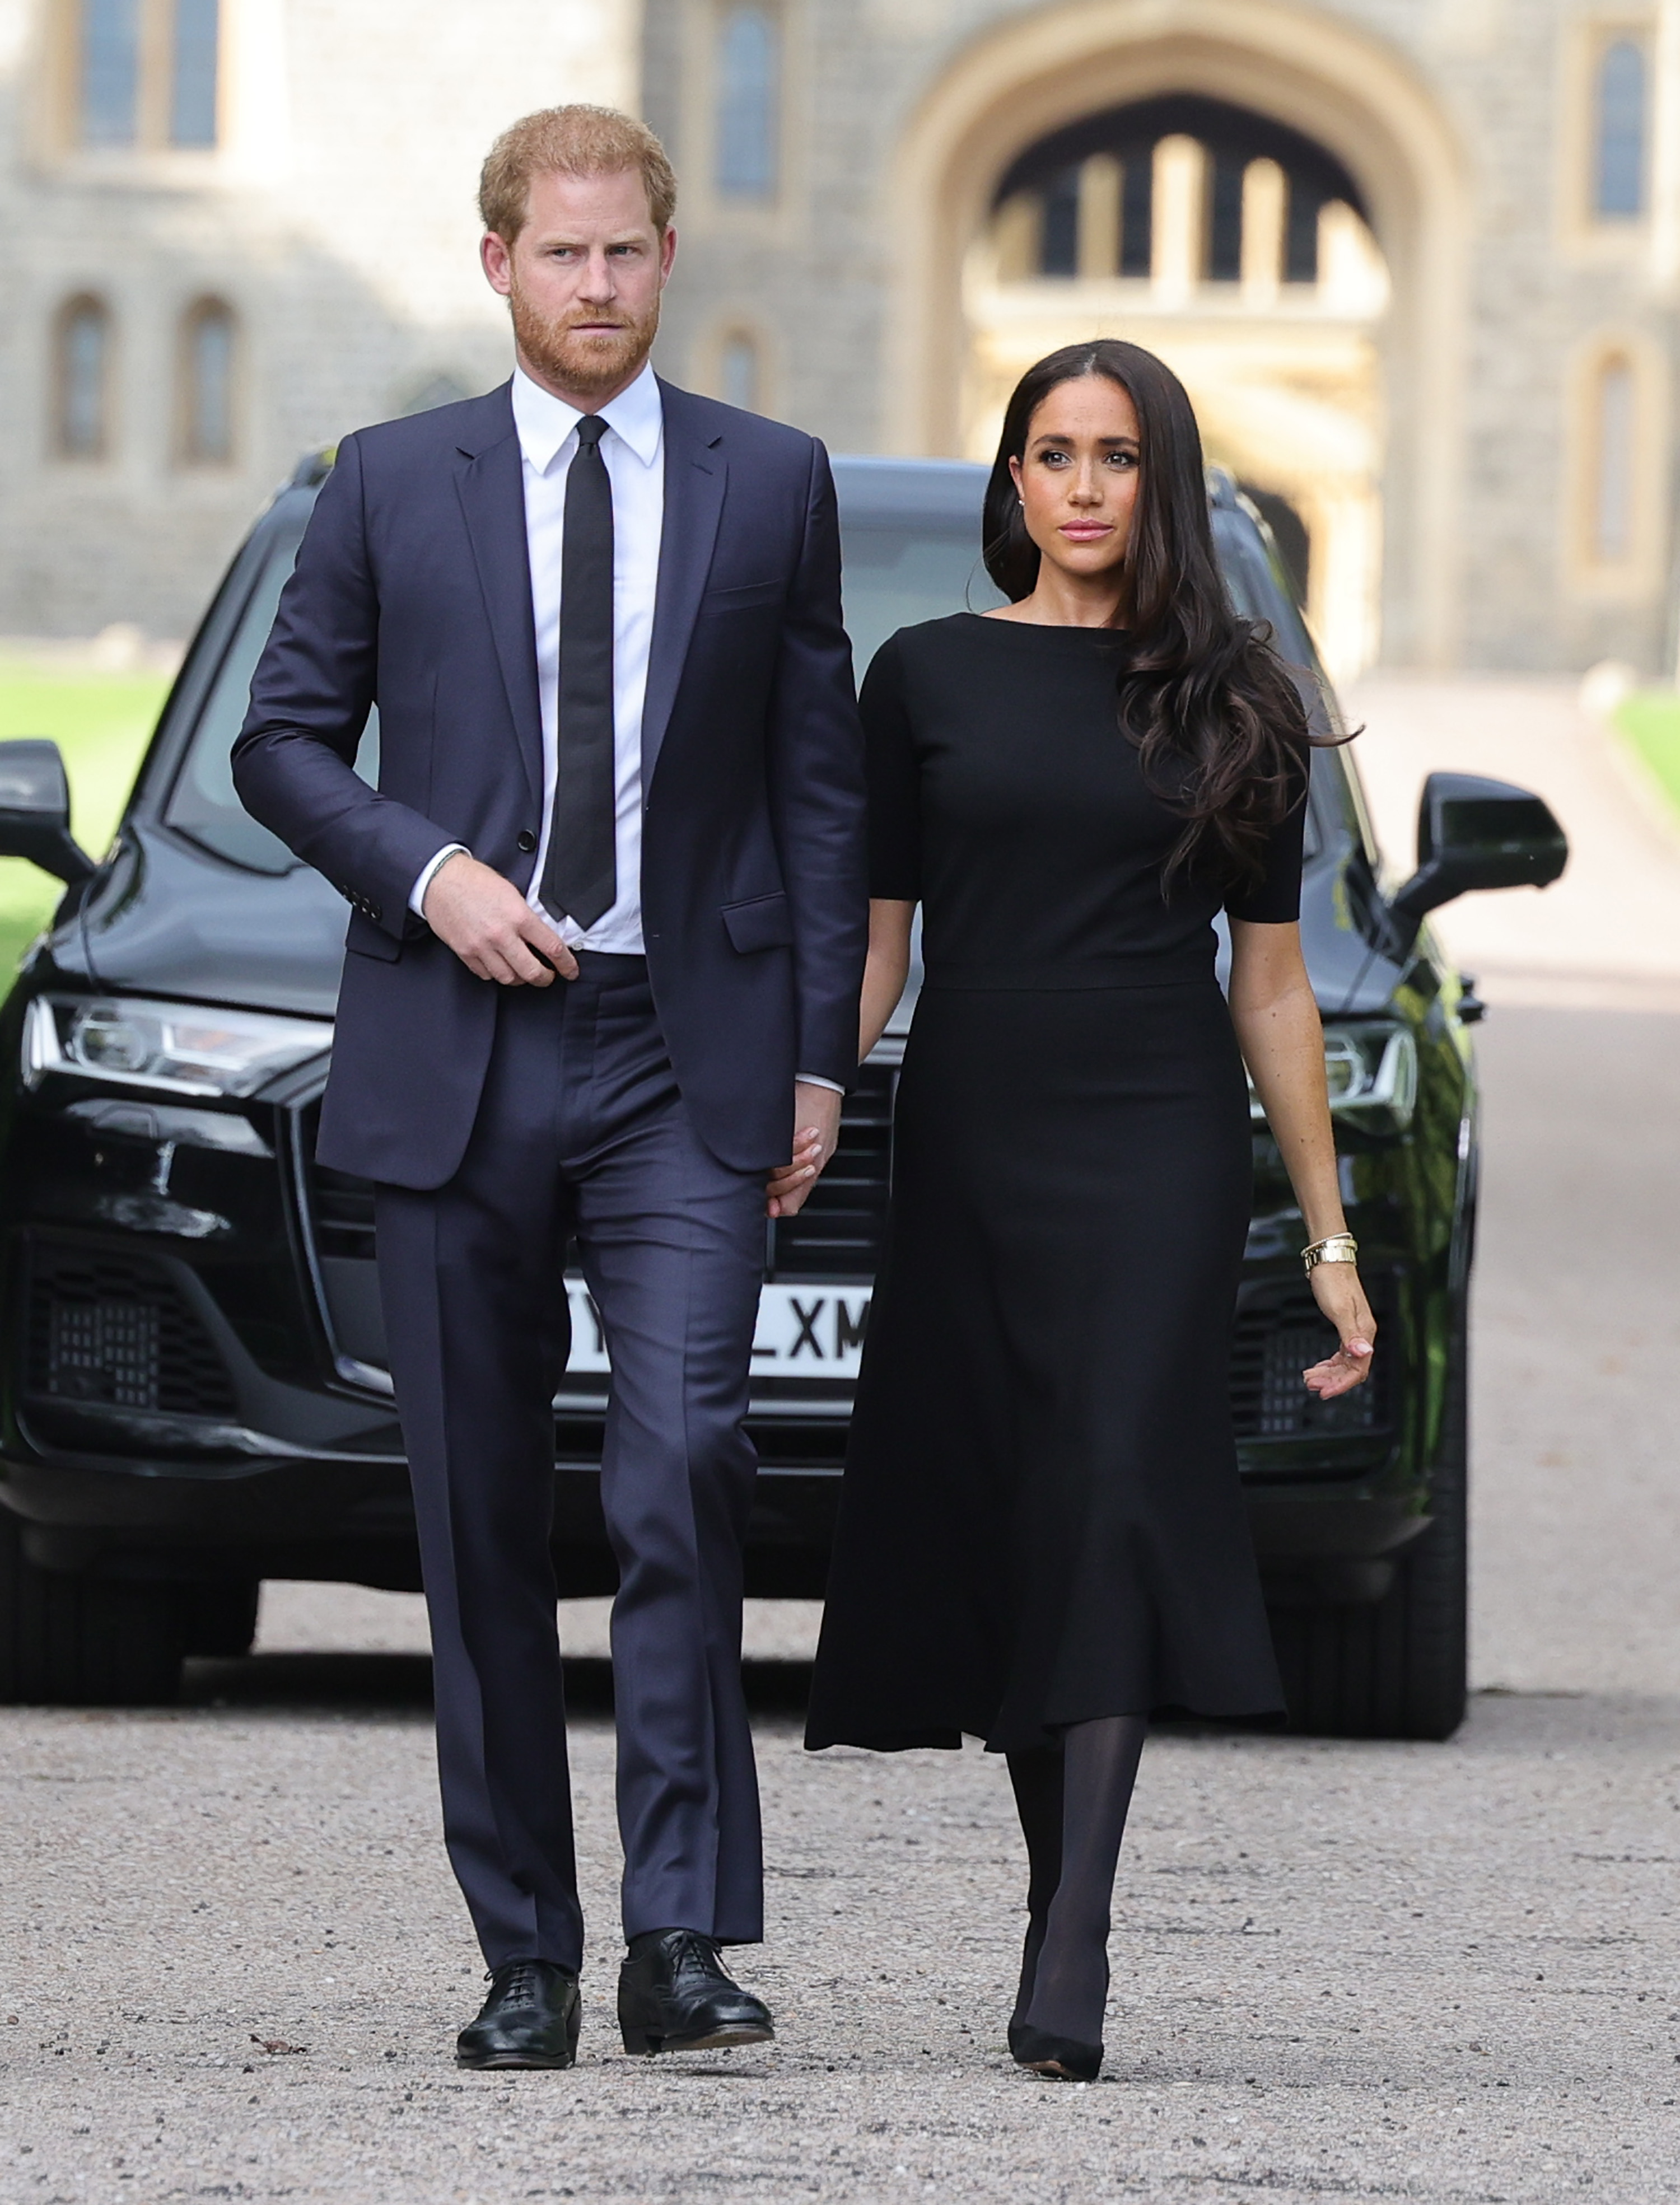 Meghan Markle and Prince Harry arrive on the long Walk at Windsor Castle arrive to view flowers and tributes to HM Queen Elizabeth on September 10, 2022 in Windsor, England | Source: Getty Images